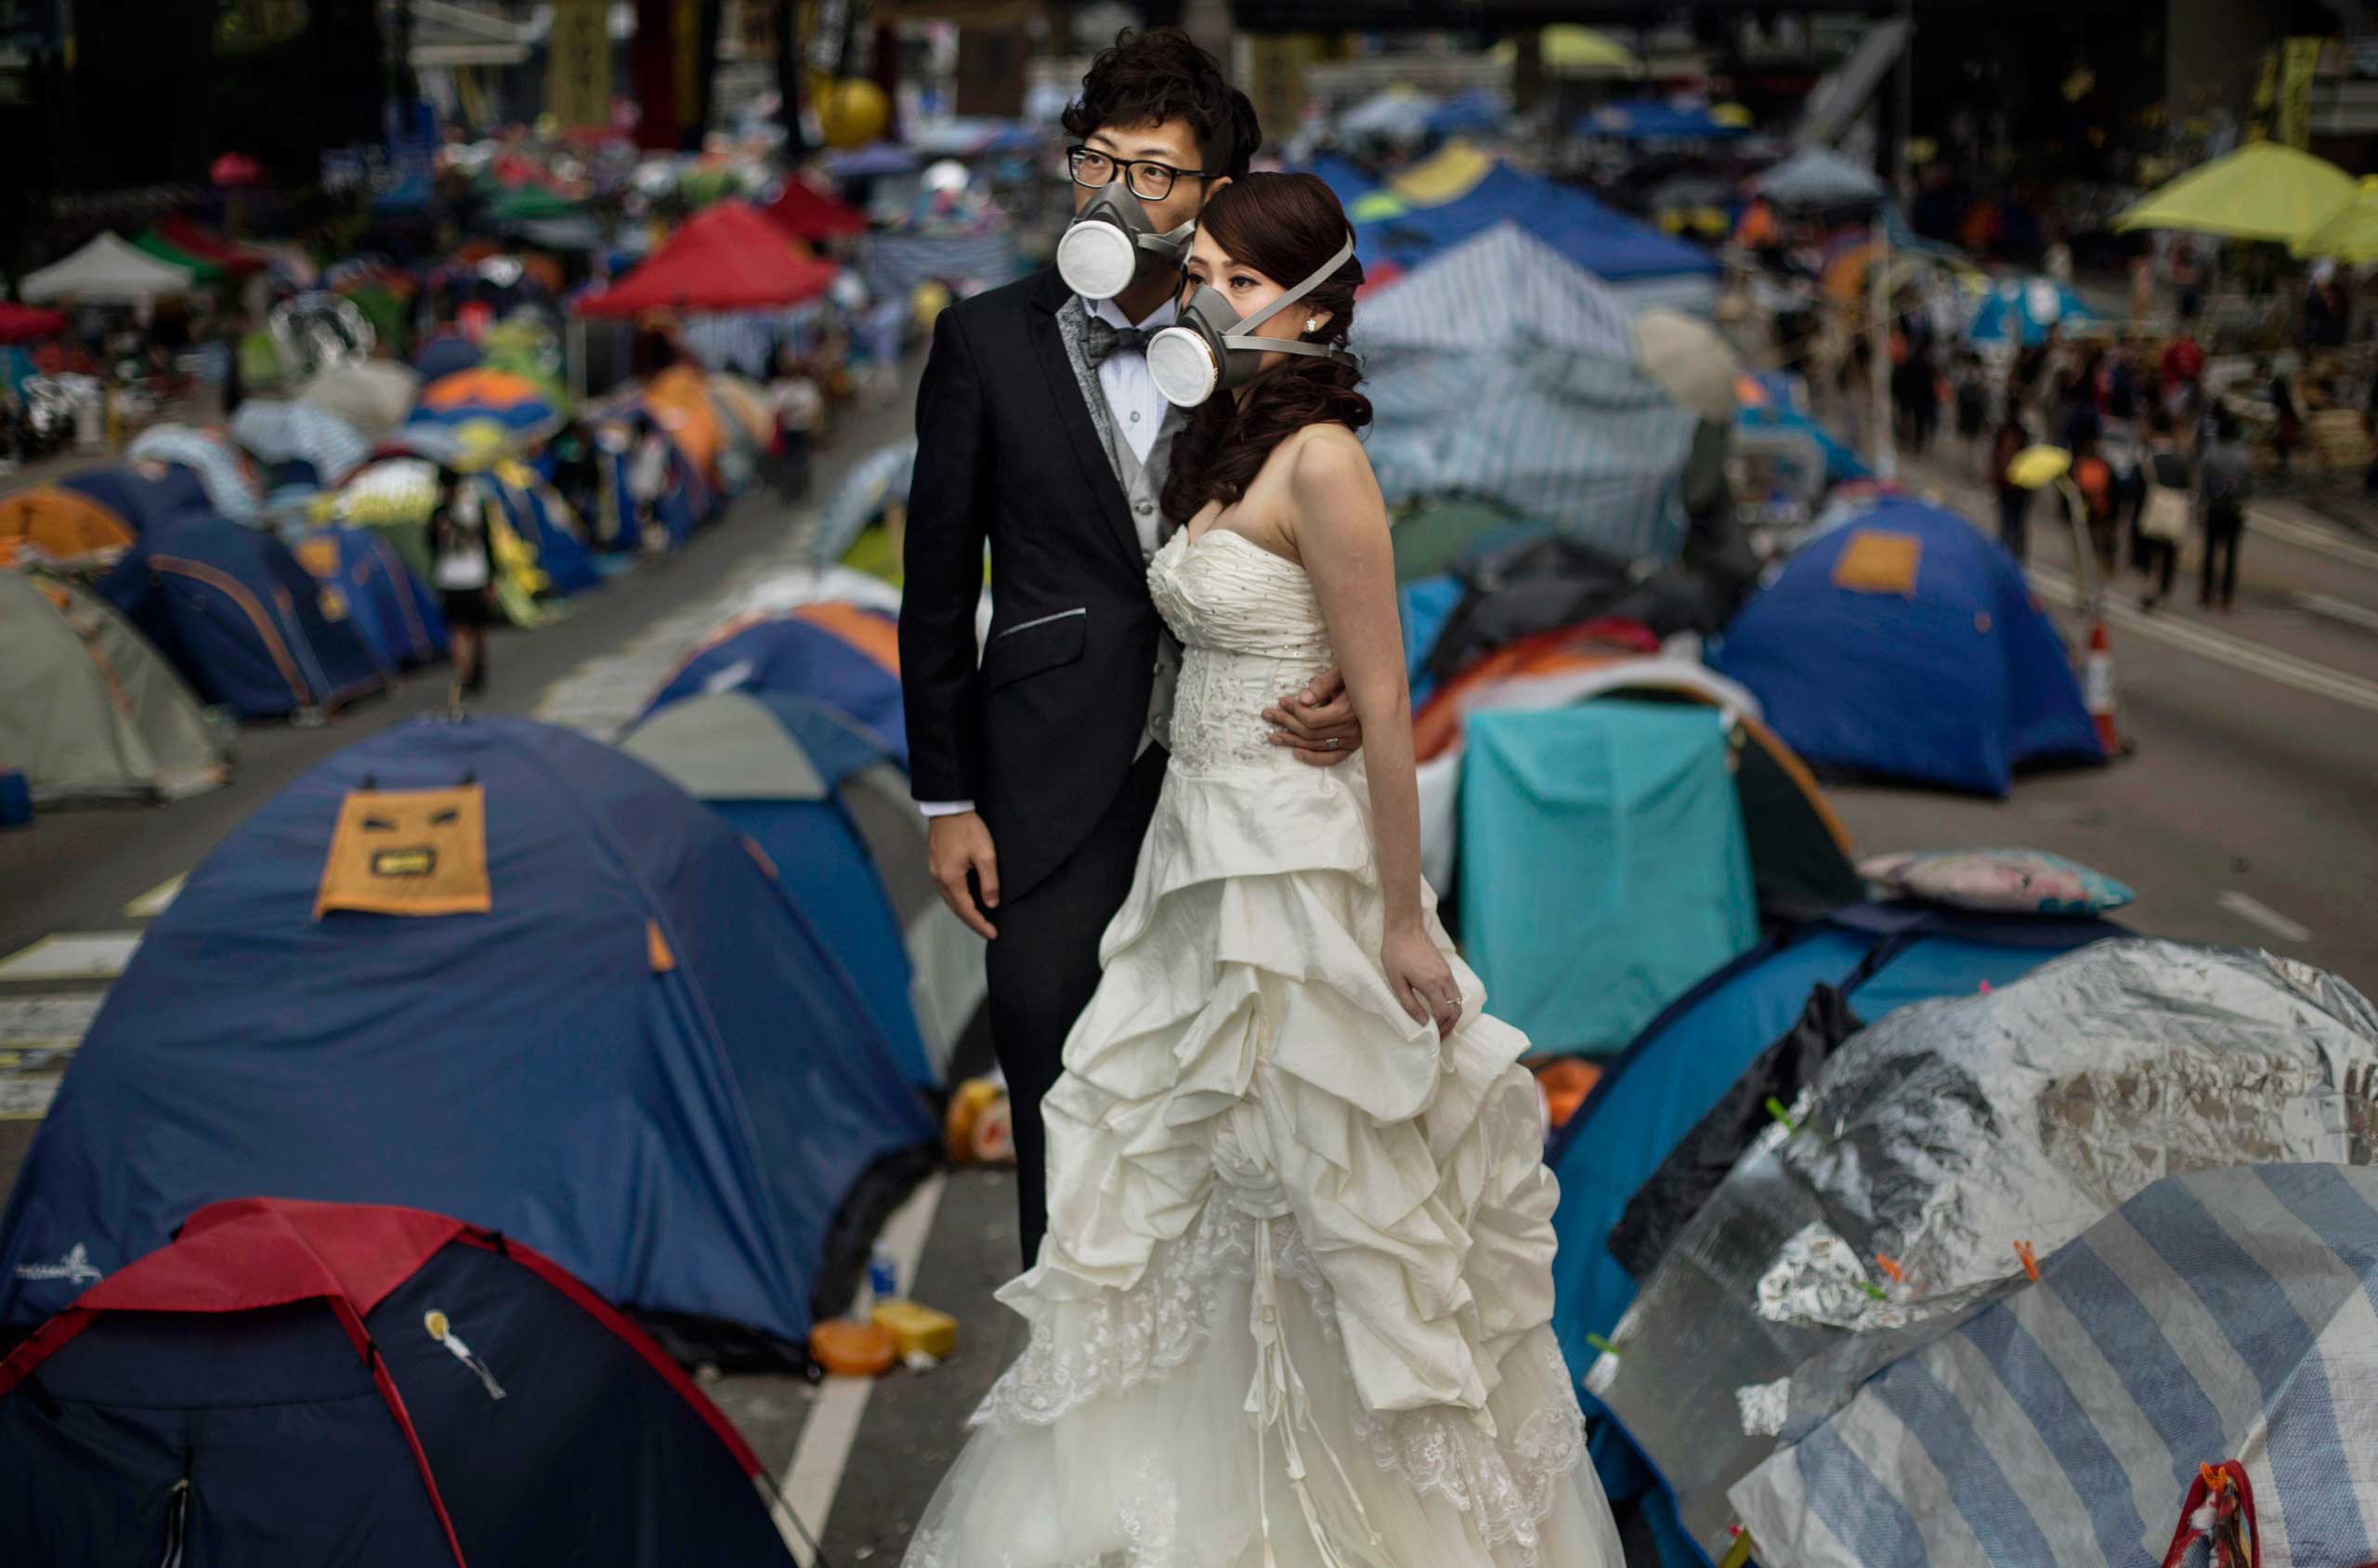 Nov. 14, 2014. A young Hong Kong couple wear gas masks as they pose for a wedding photographer prior to their marriage next to the tents used by pro-democracy demonstrators at the Admiralty protest site in Hong Kong.